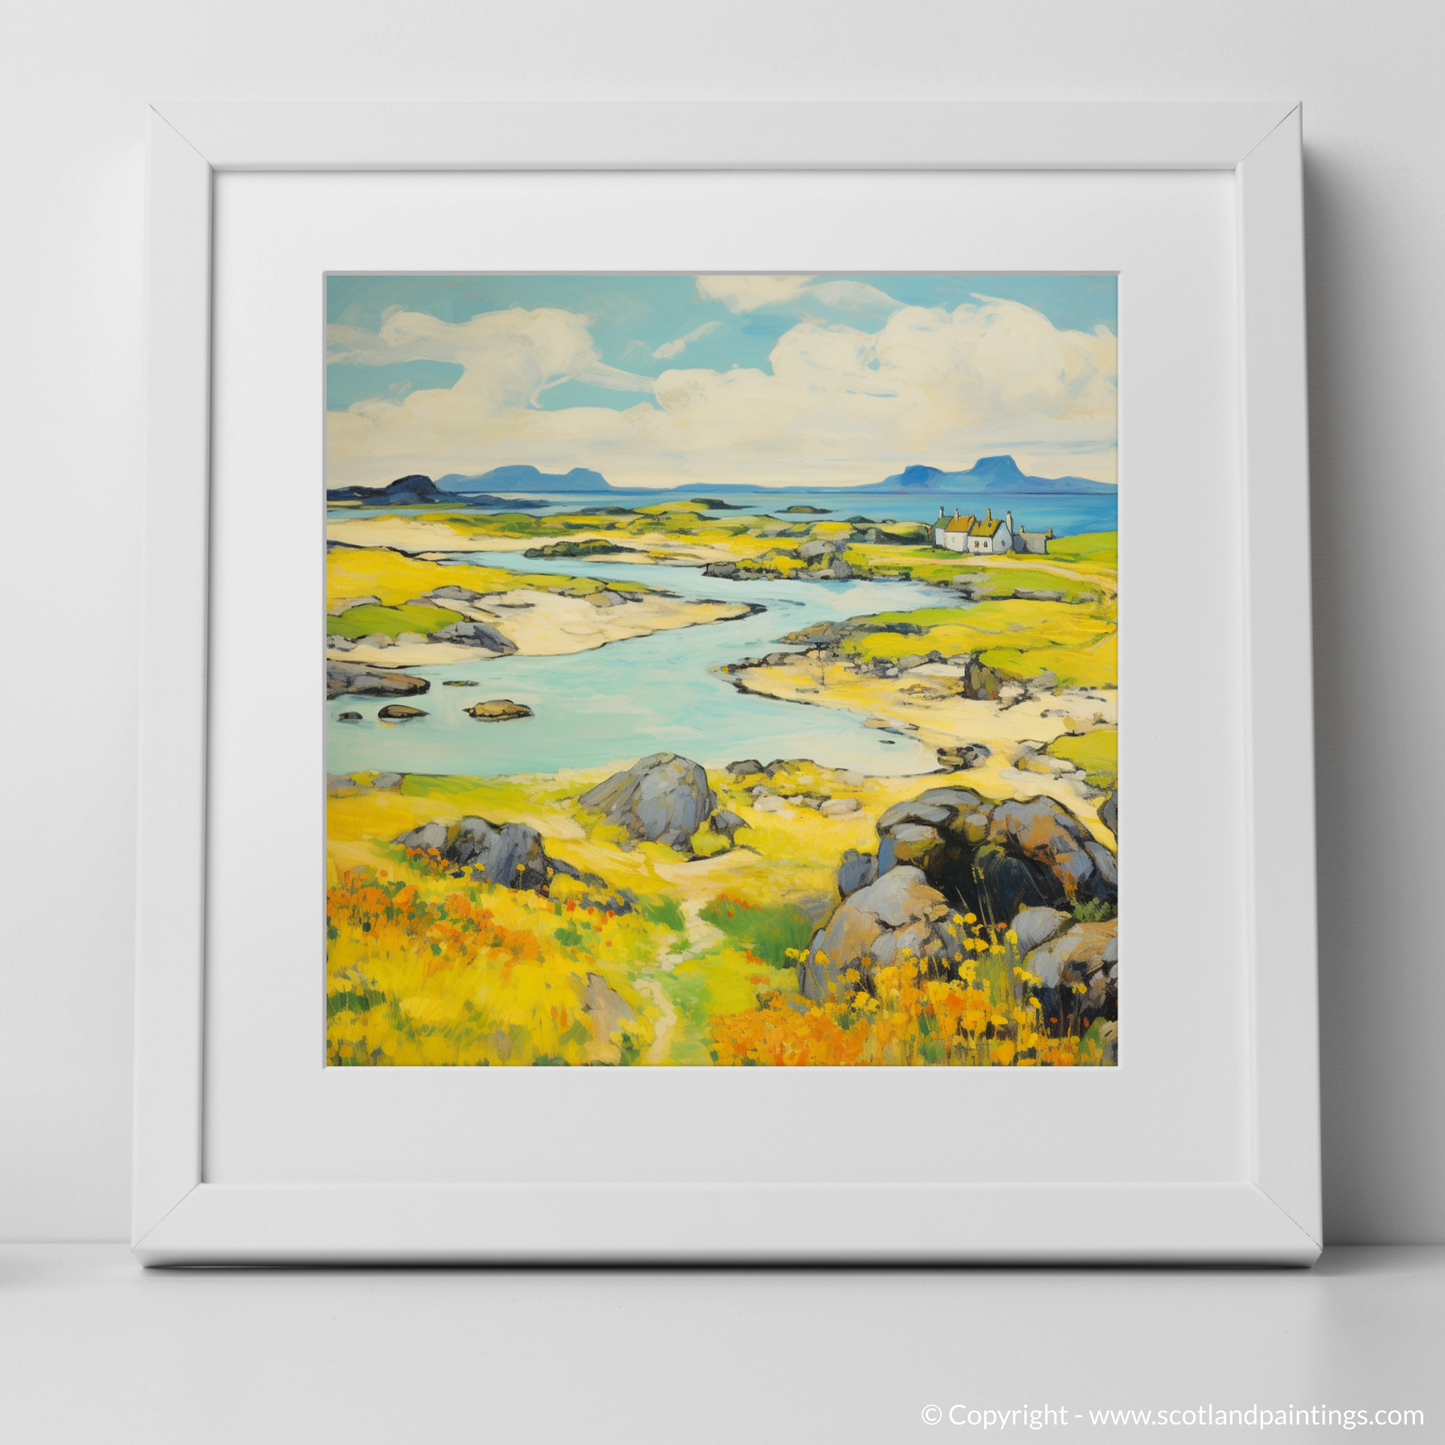 Art Print of Isle of Lewis, Outer Hebrides in summer with a white frame